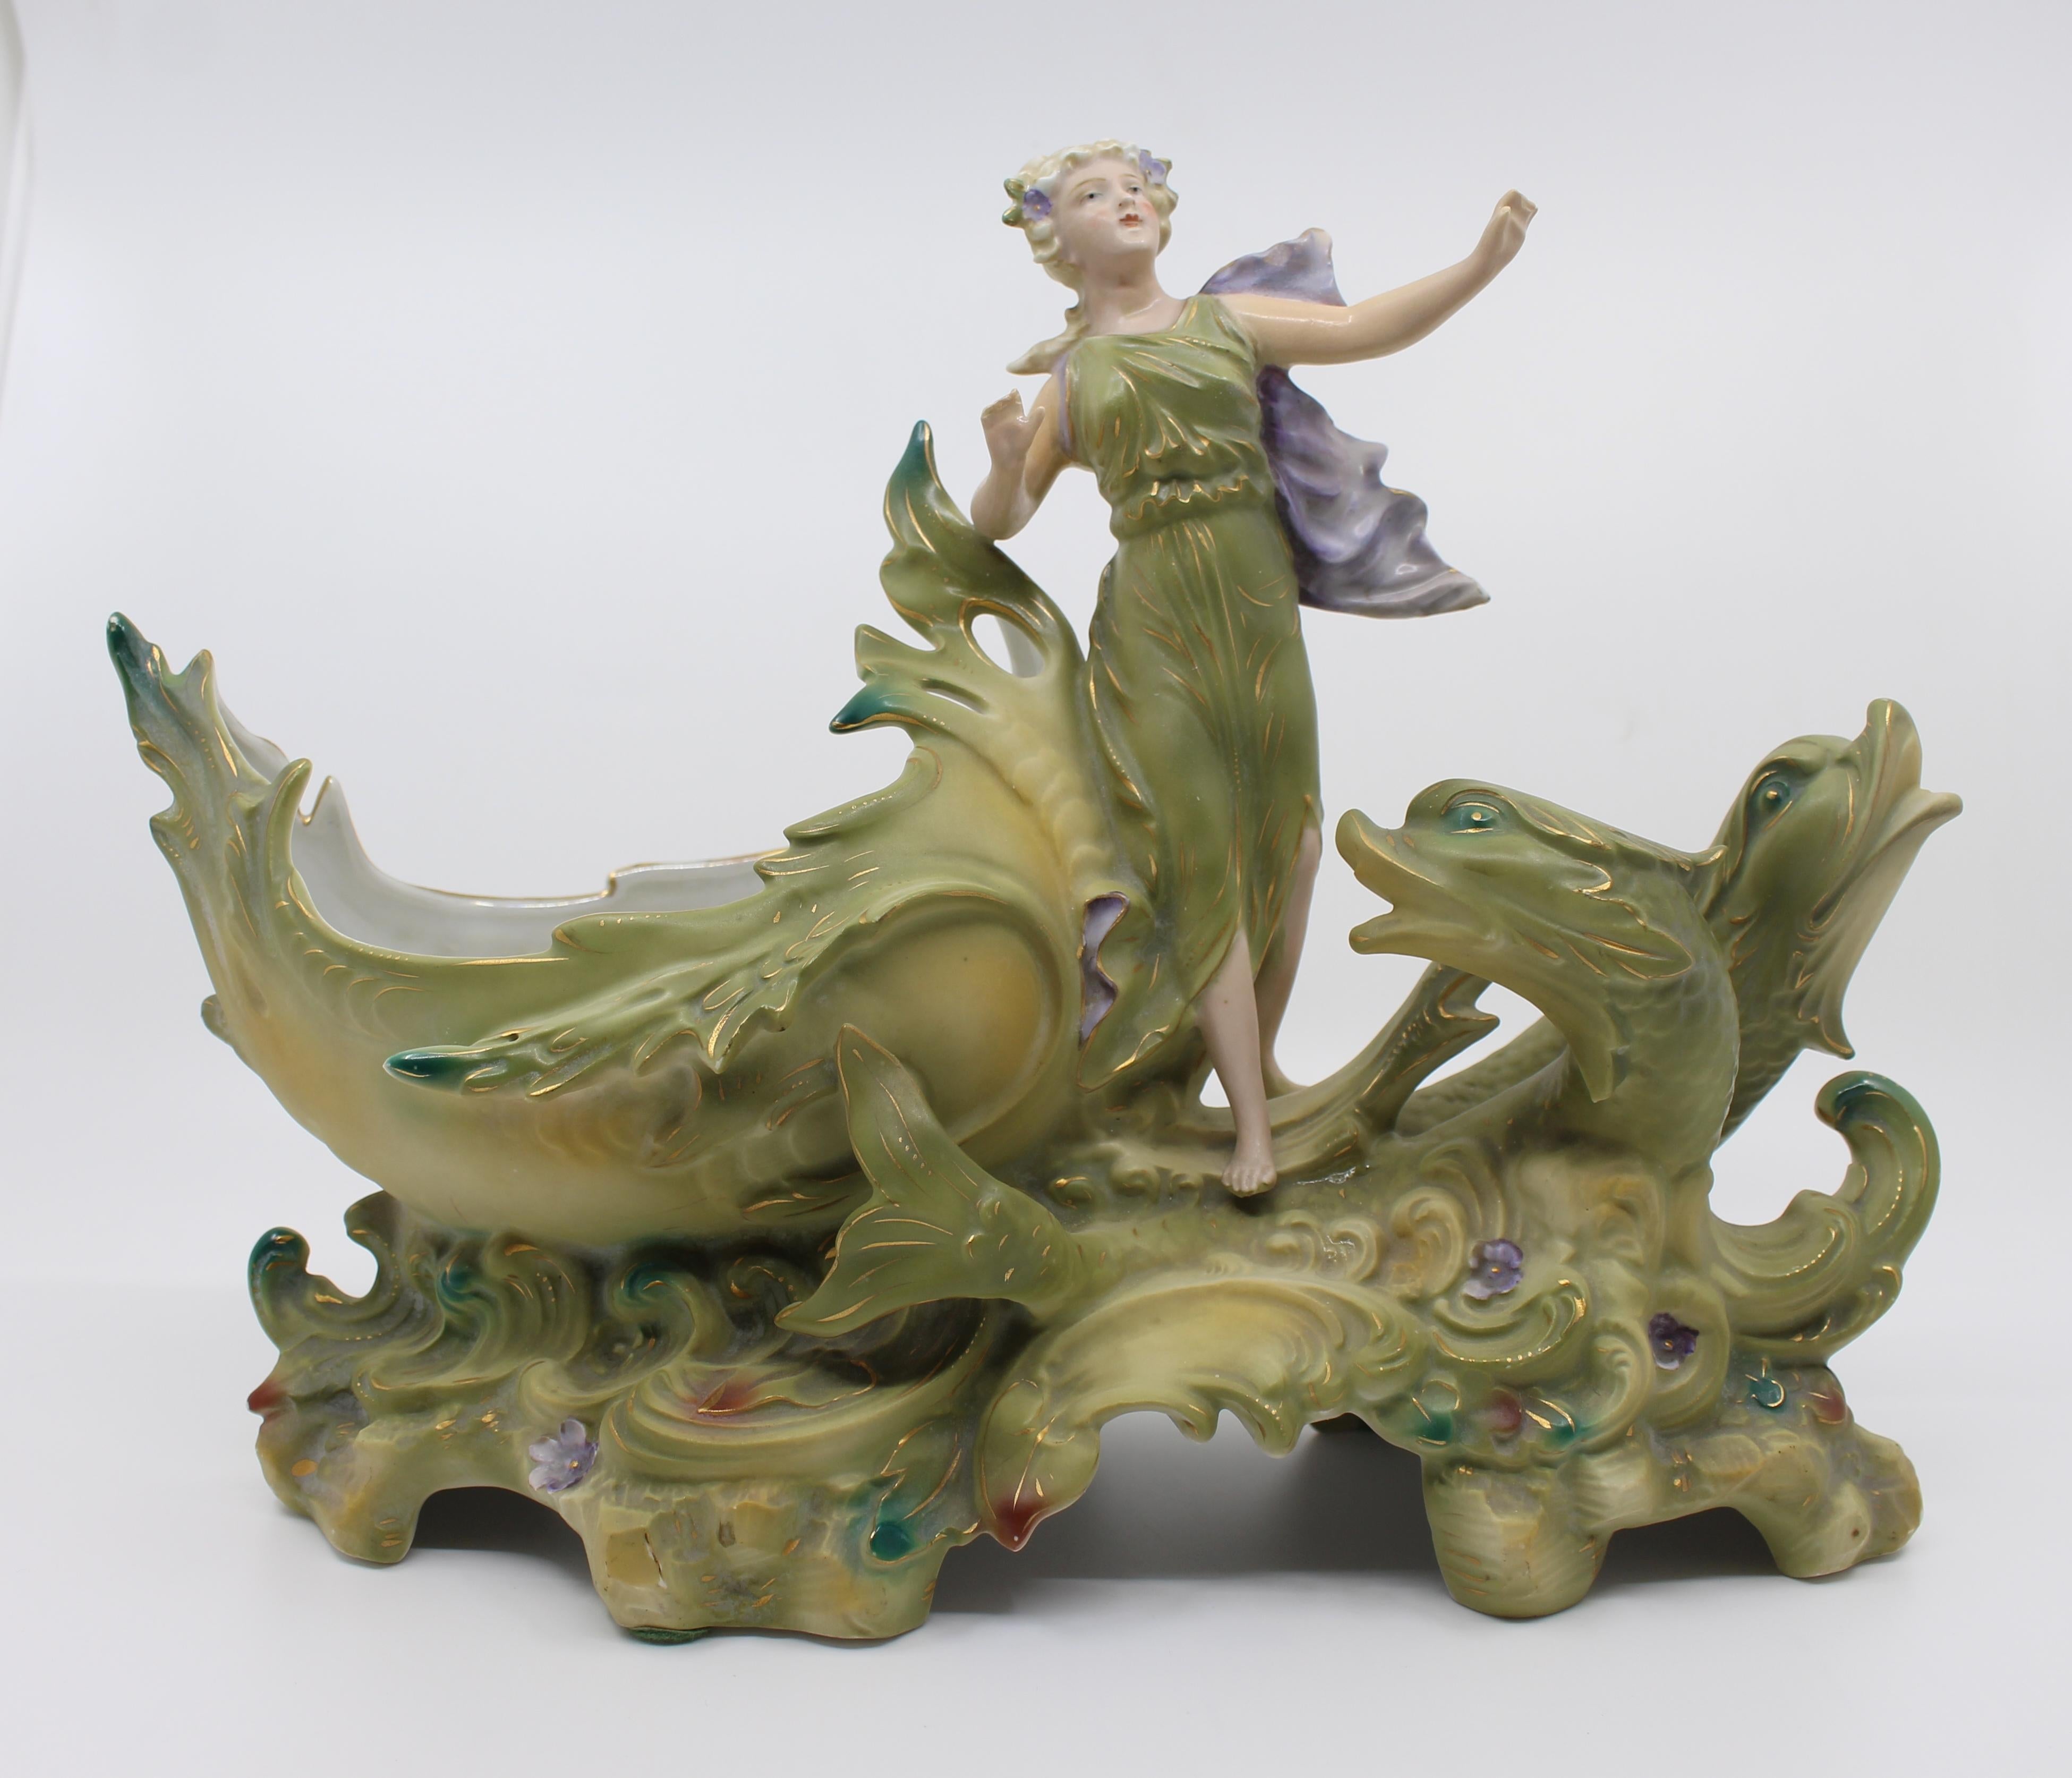 Vintage Continental Porcelain Sea Nymph sculpture centrepiece bowl


Organ Continental, 20th c. vintage

Measures: Width 32 cm / 12 1/2 in

Depth 13 cm / 5 in

Height 24 cm / 9 1/2 in

Condition Good condition commensurate with age.